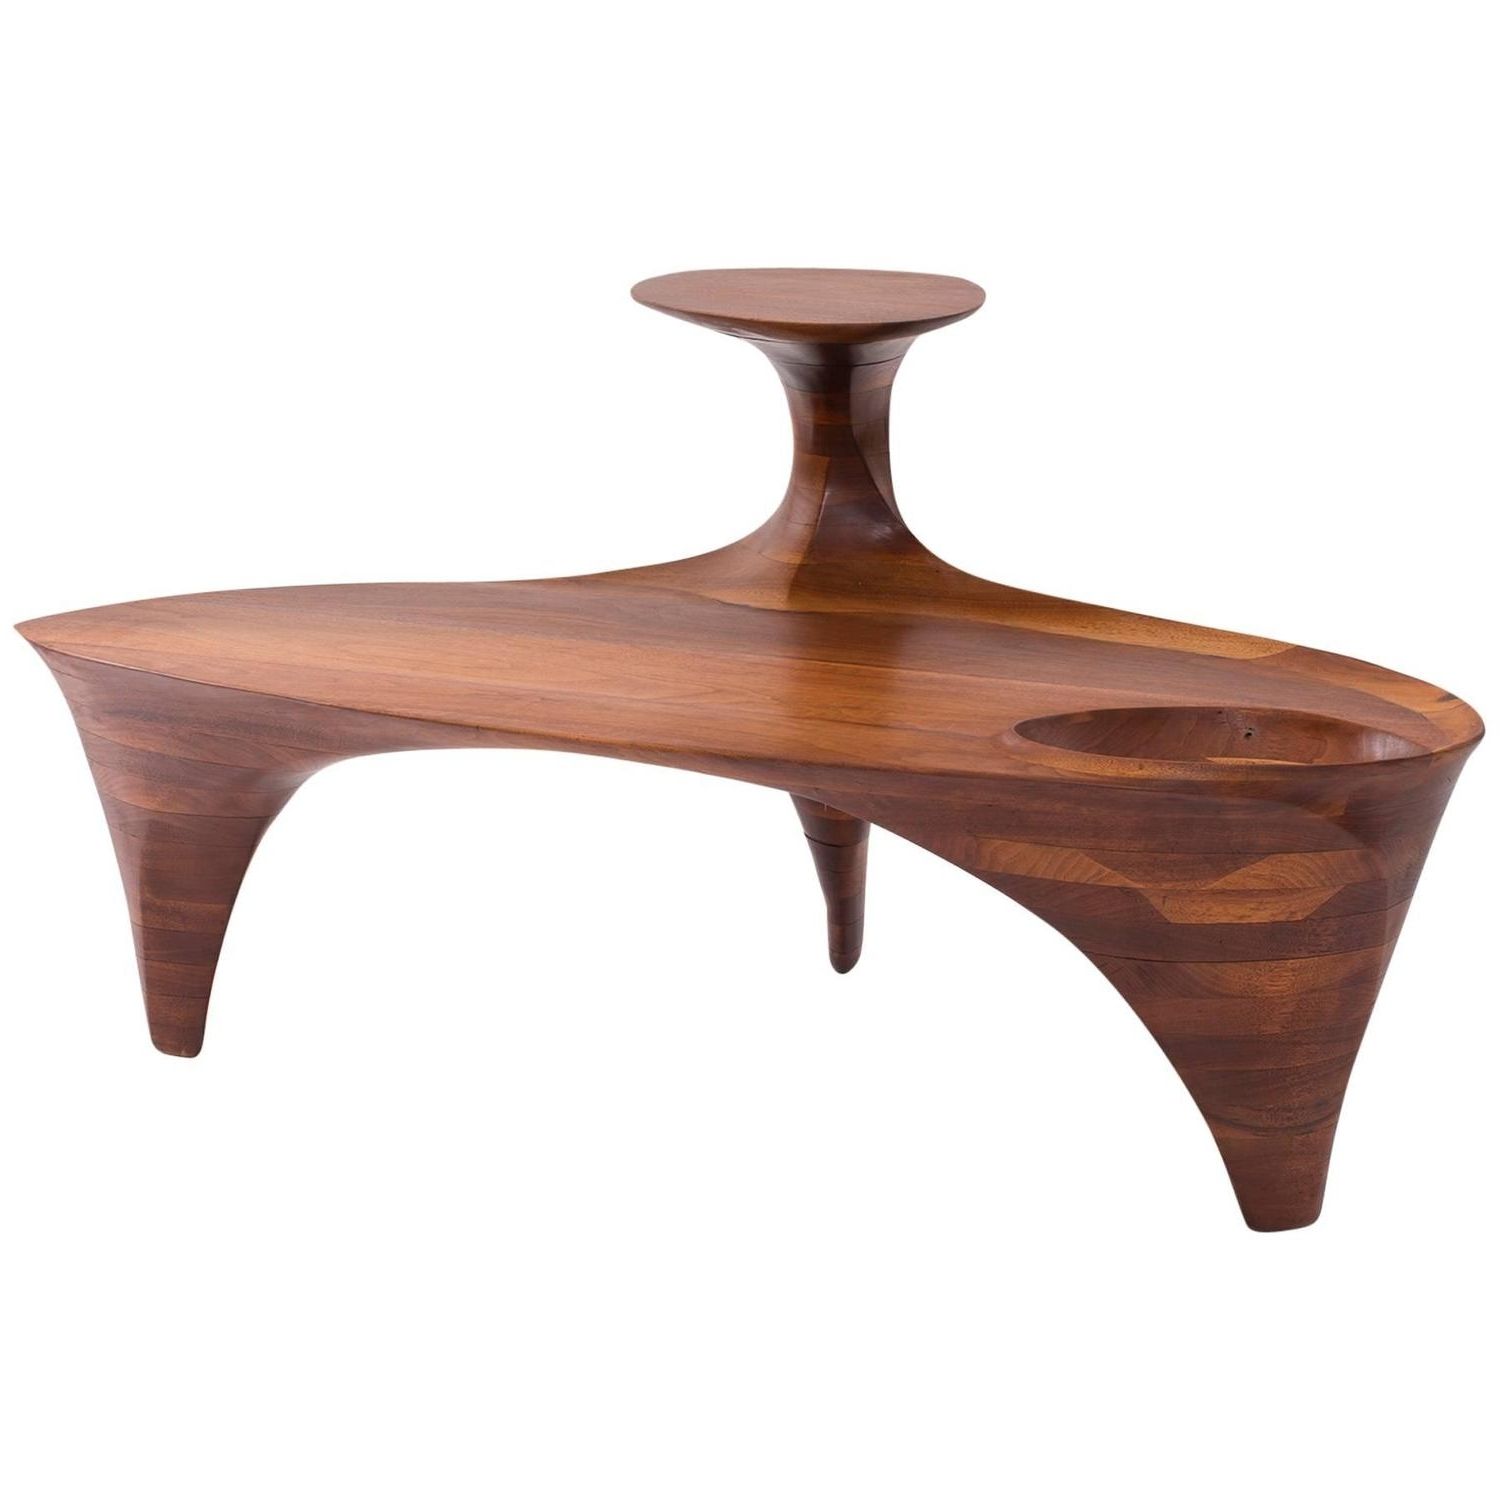 One Off Allen Ditson Walnut Cocktail Table At 1stdibs Intended For Recent Allen Cocktail Tables (View 18 of 20)